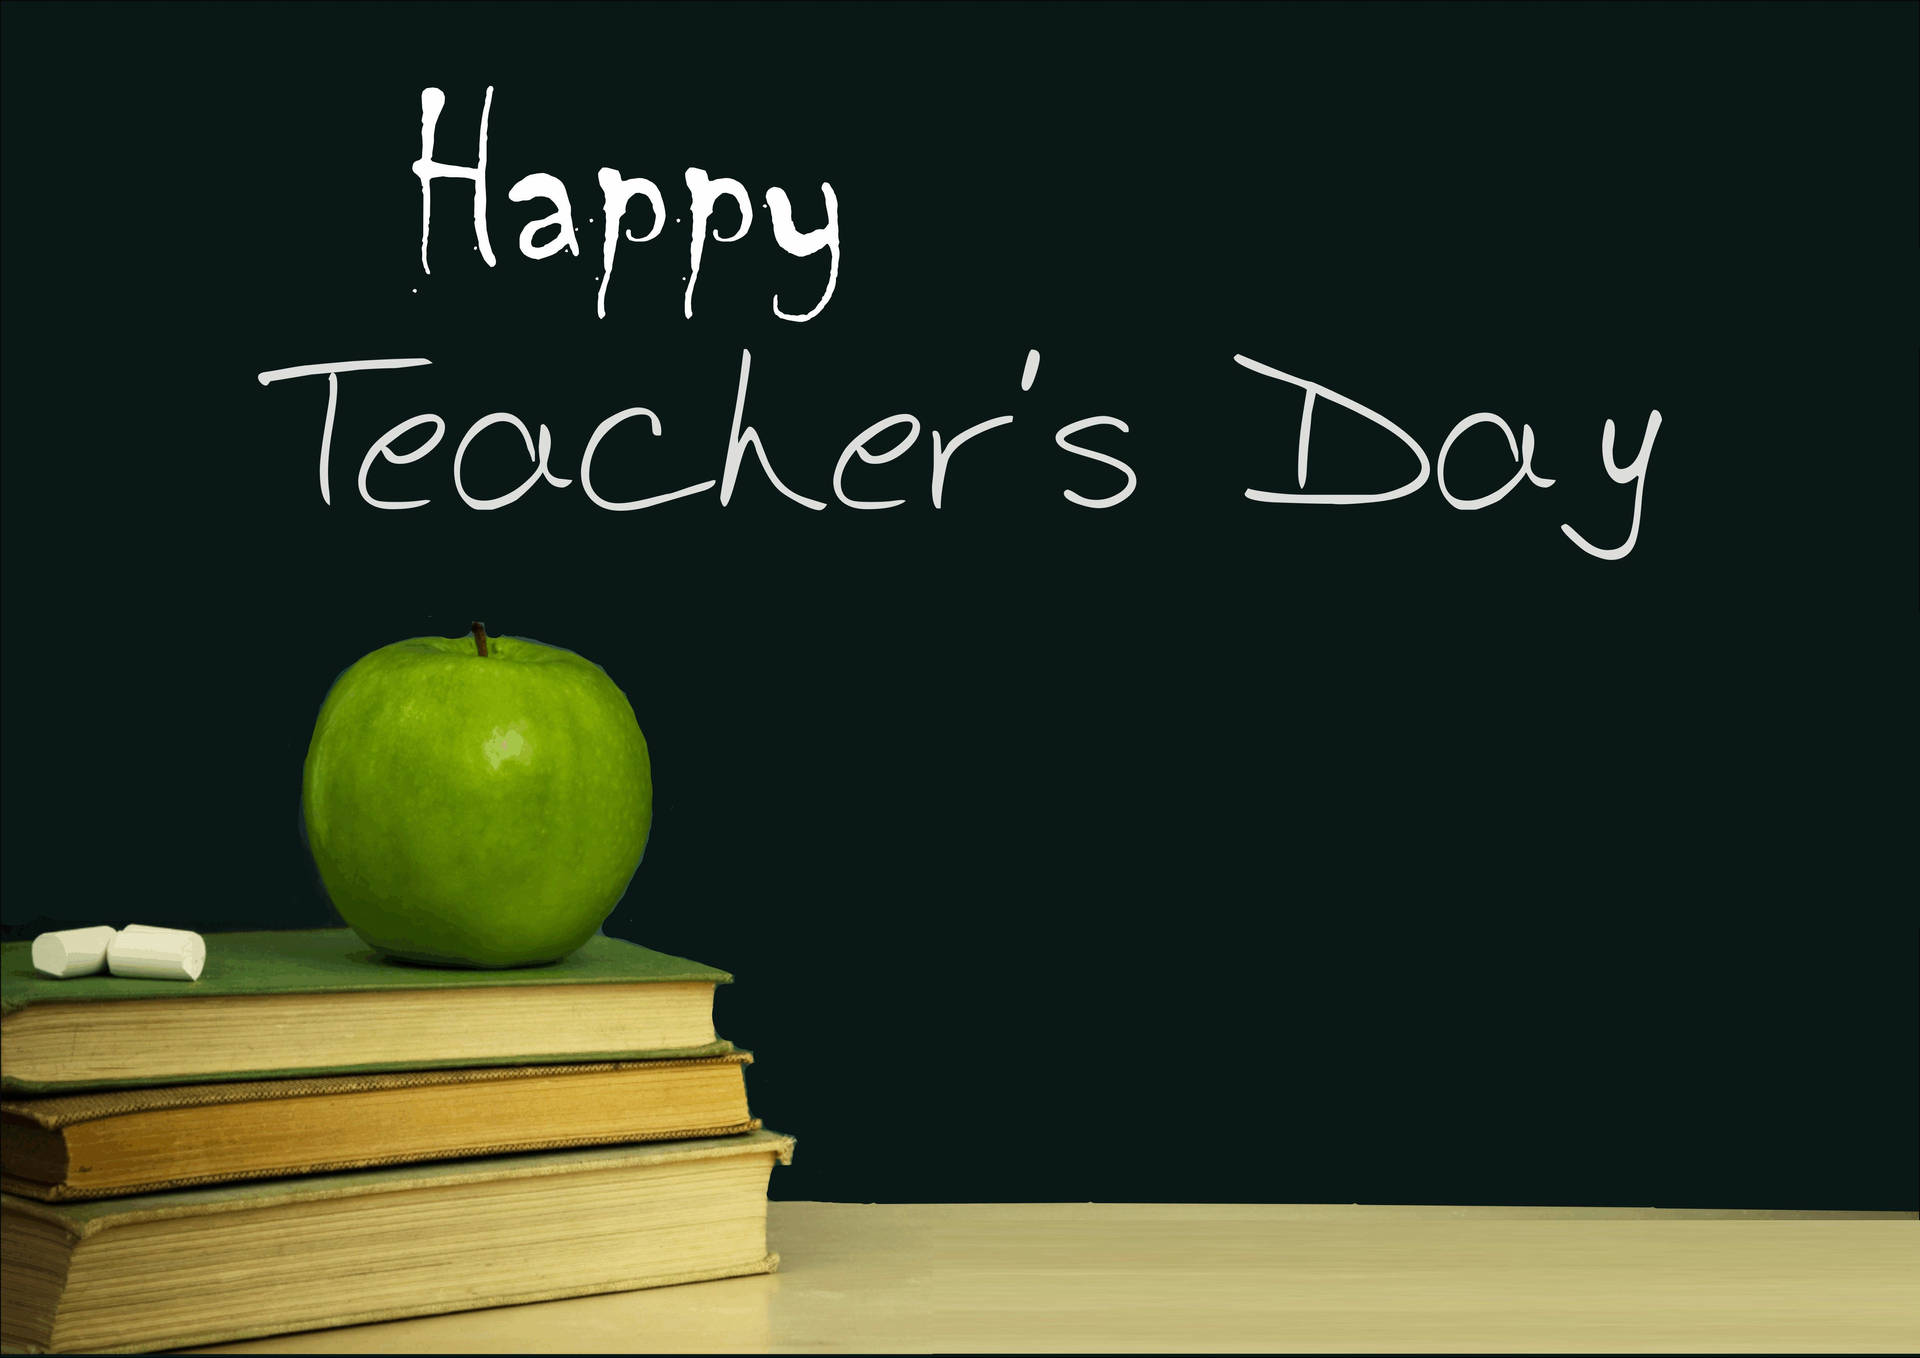 Happy Teachers' Day Books And Apple Background